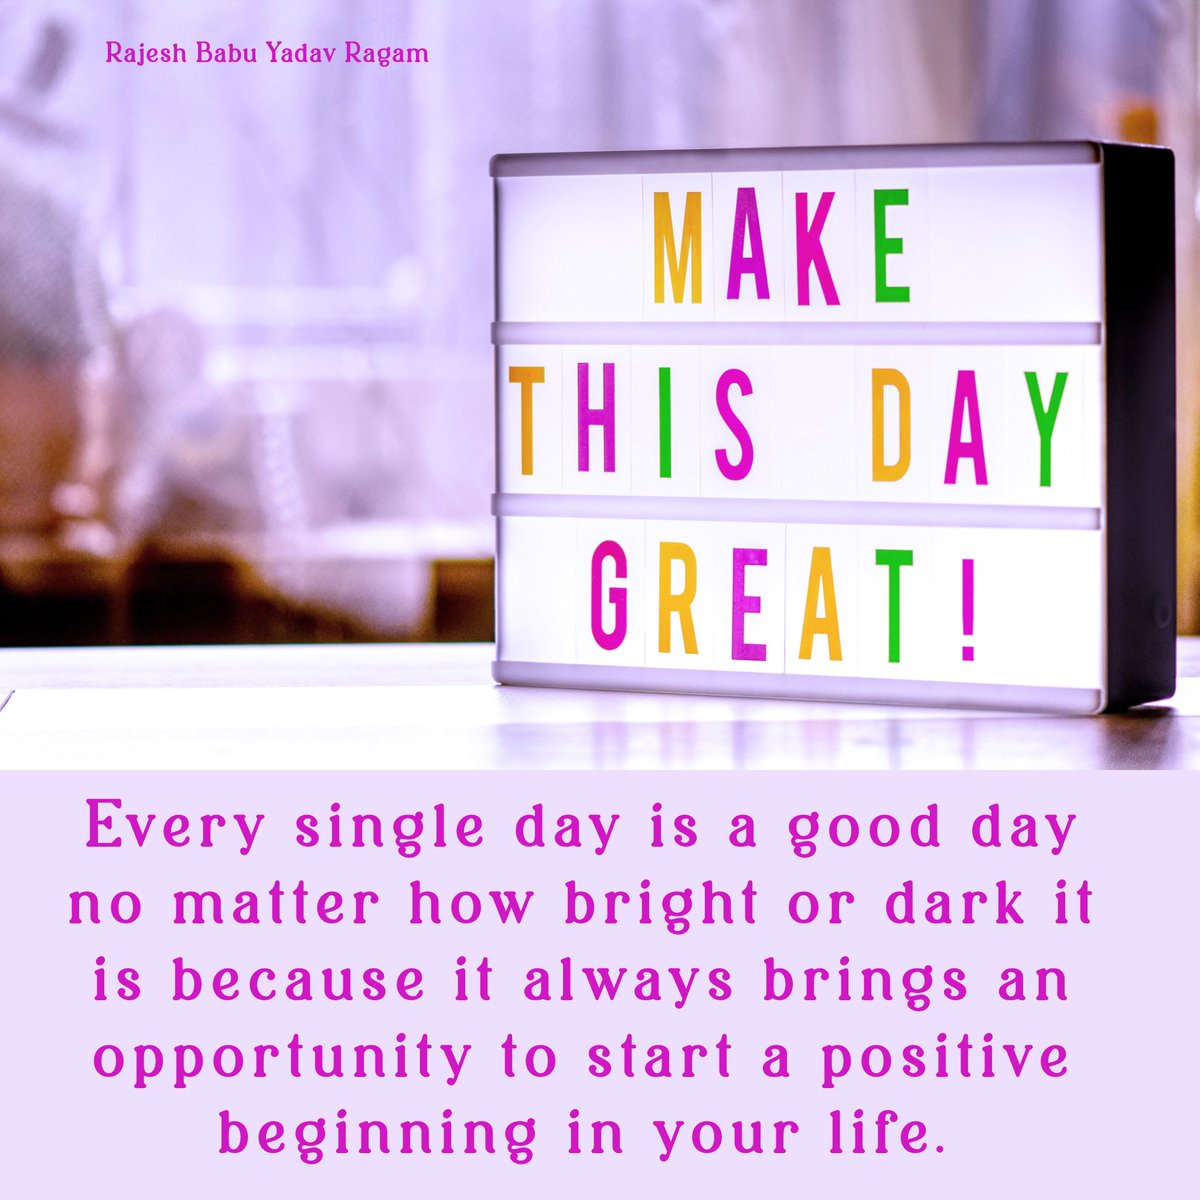 Every single day is a good day no matter how bright or dark it is because it always brings an opportunity to start a positive beginning in your life. @RajeshBabuYadav #RajeshBabuYadavRagam